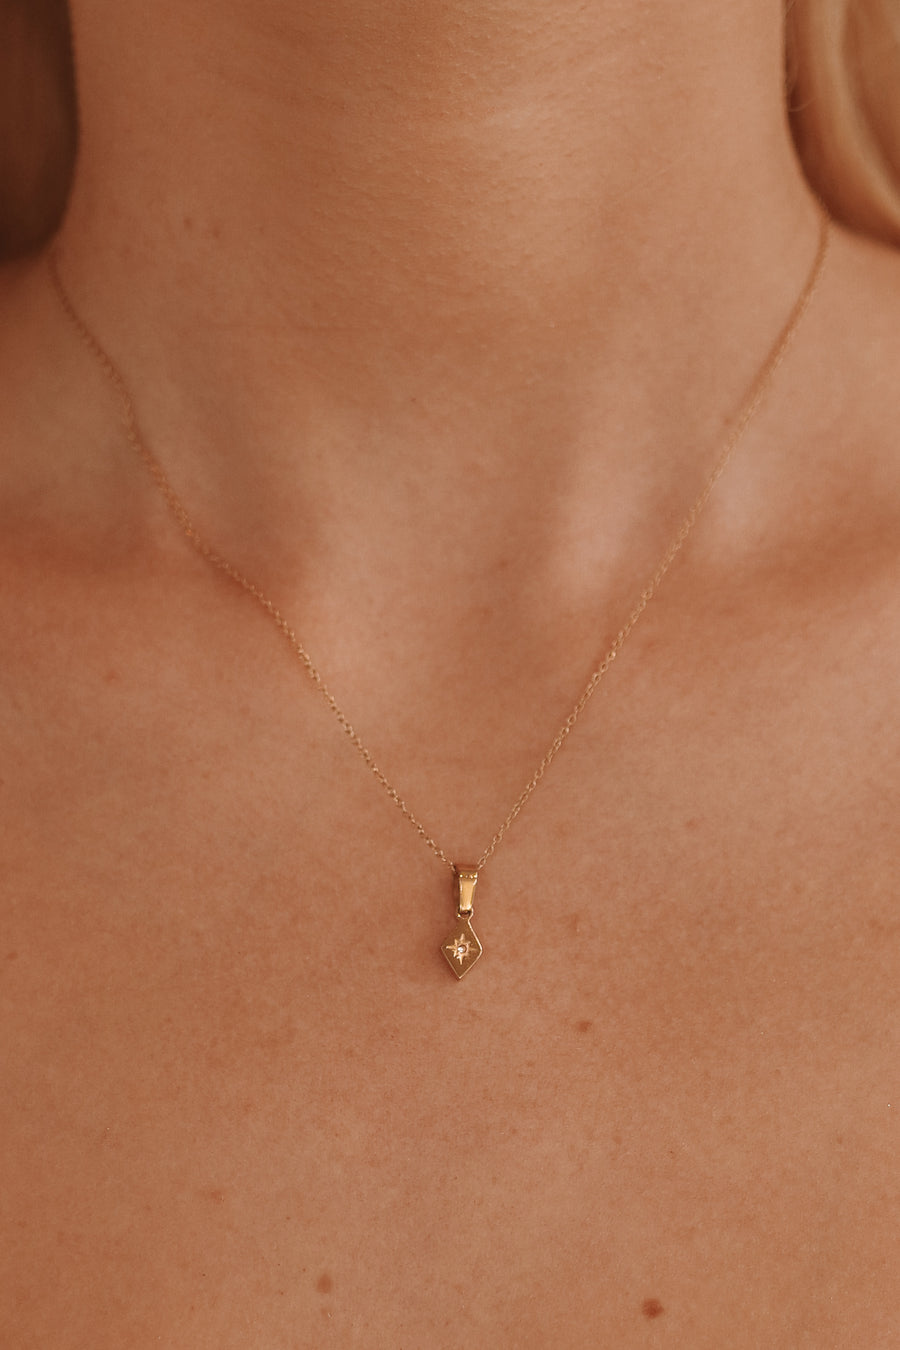 Octavia - Stainless Steel Gold or Silver Necklace